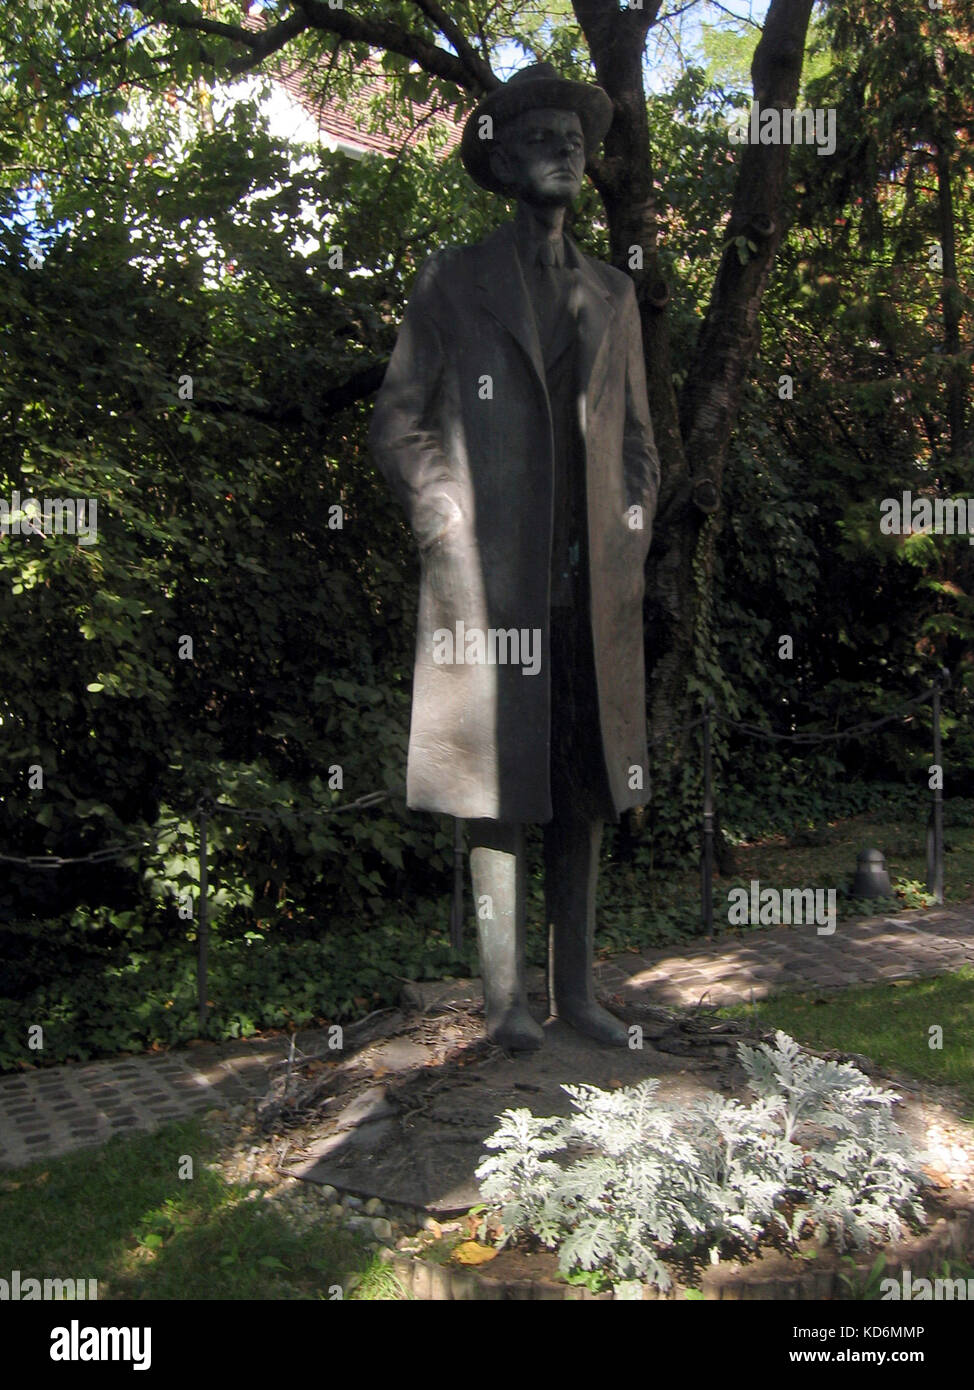 Statue of Bela Bartok outside the Bela Bartok Memorial House  -the one-time home of the composer, Hungary, Budapest. Hungarian composer and pianist, 1881-1945. Stock Photo